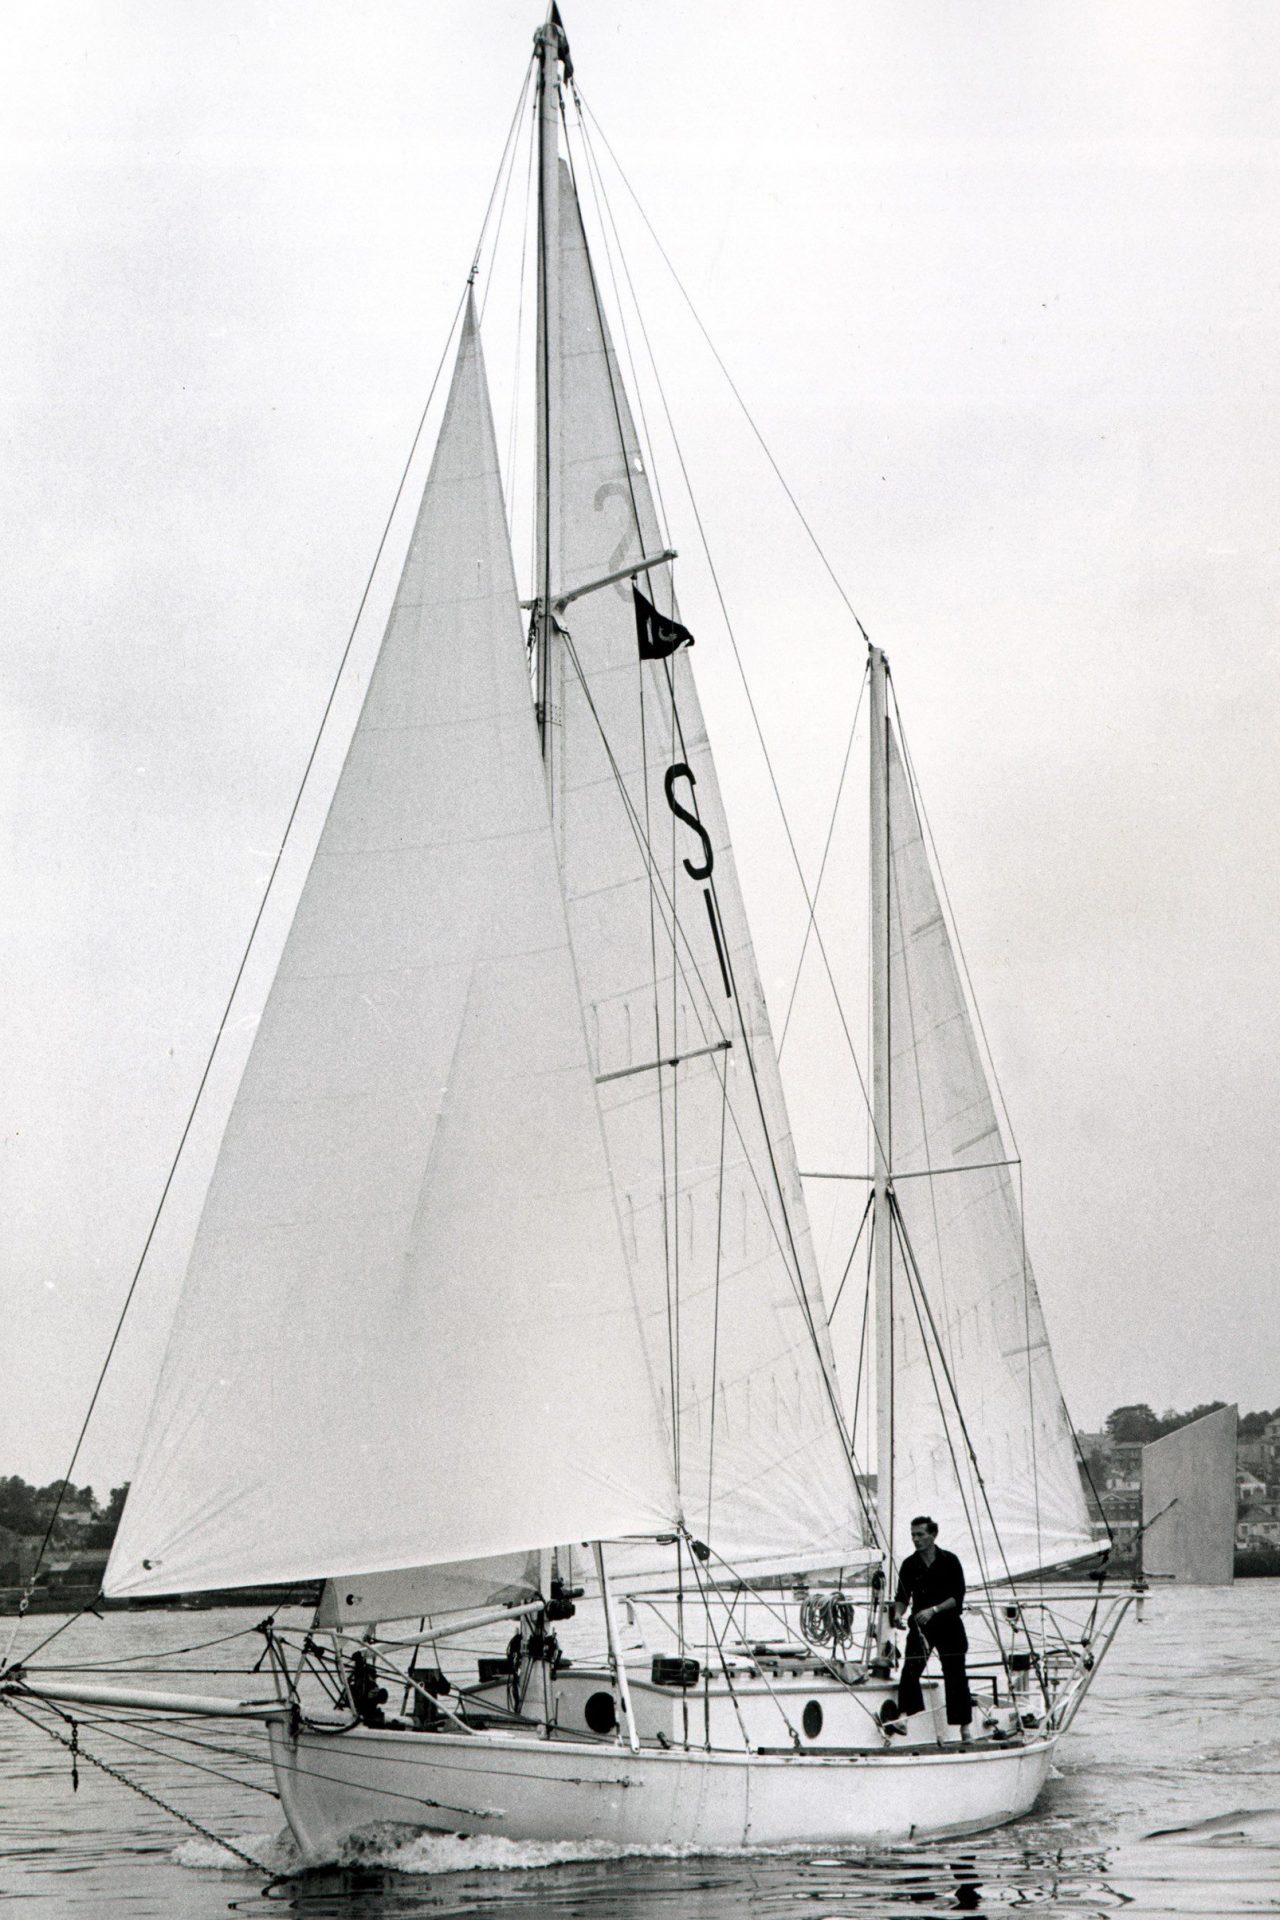 <p>While most sailors began their race early in June, Crowhurst scrambled to set sail on the last day, the 31st of October. He encountered immediate problems with his boat, equipment, and his lack of open-ocean sailing skills caused him to make less than half of his planned speed.</p>